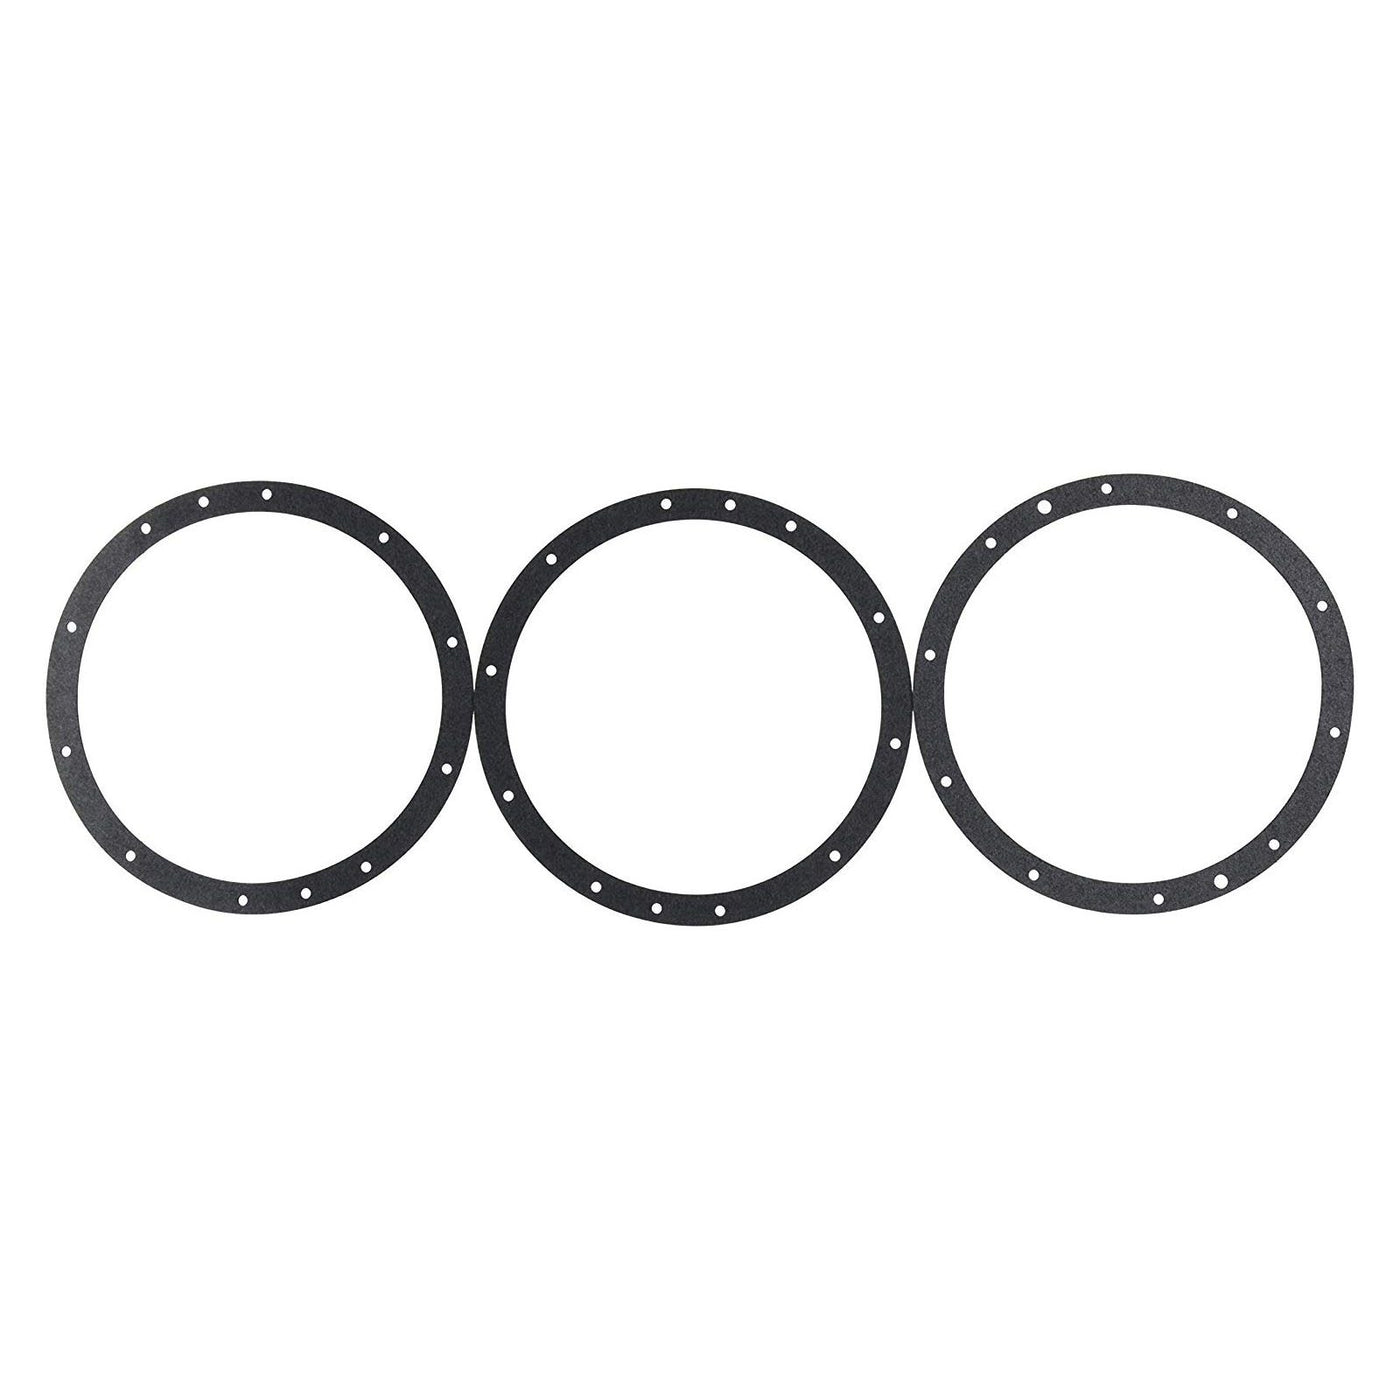 Pentair 79200400 American 10 Hole Pattern Gasket 3 Pack for Light Niche